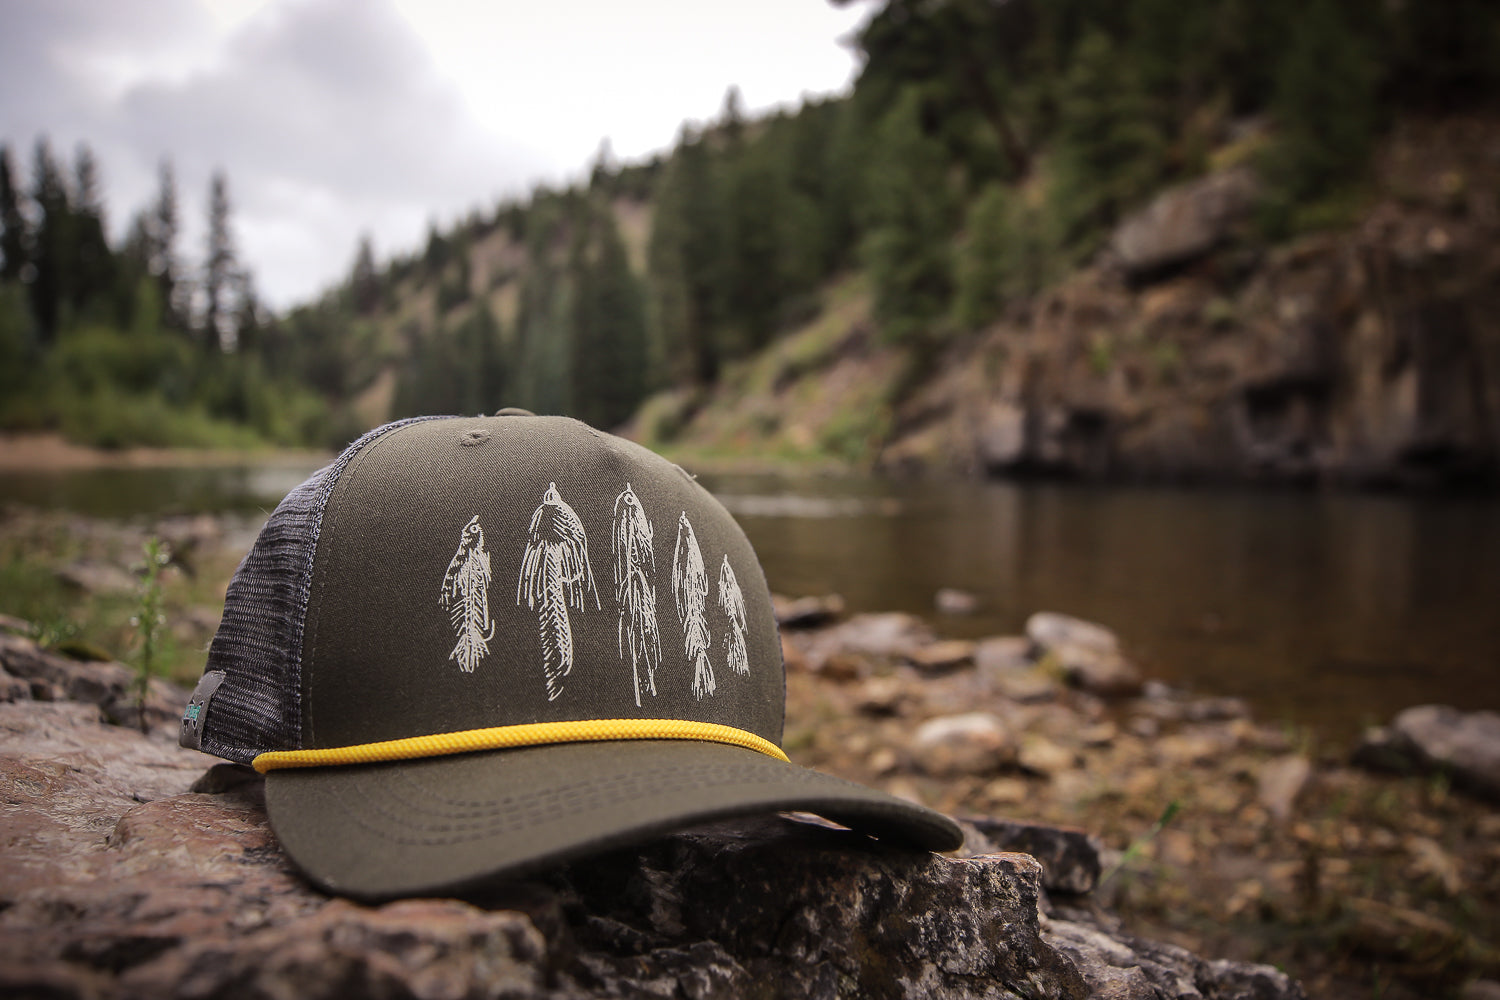 A hat on on a rock by a river - the hat has streamer flies on the front.